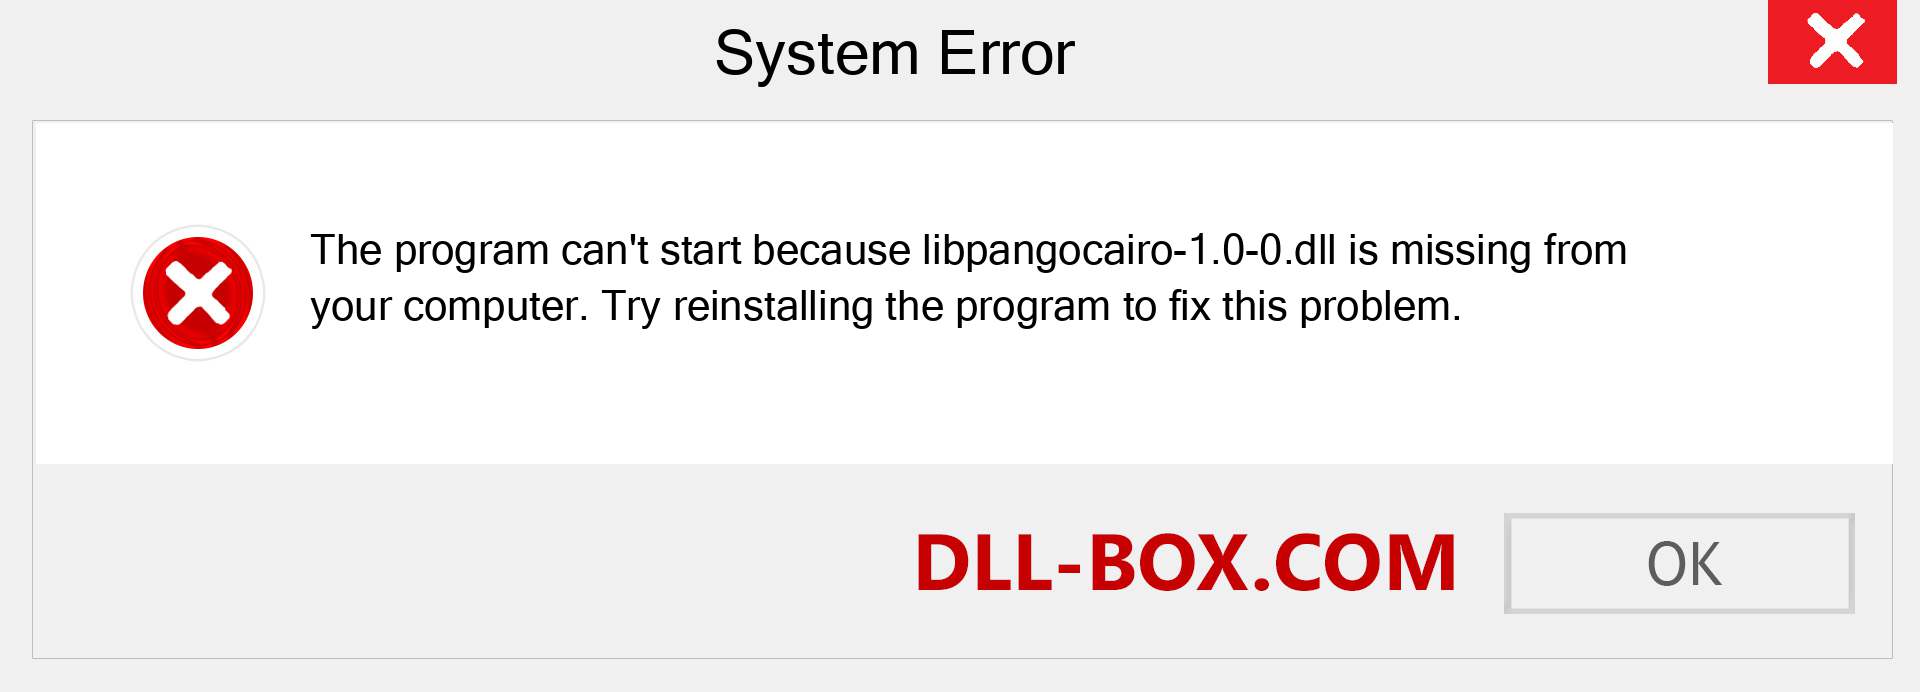  libpangocairo-1.0-0.dll file is missing?. Download for Windows 7, 8, 10 - Fix  libpangocairo-1.0-0 dll Missing Error on Windows, photos, images